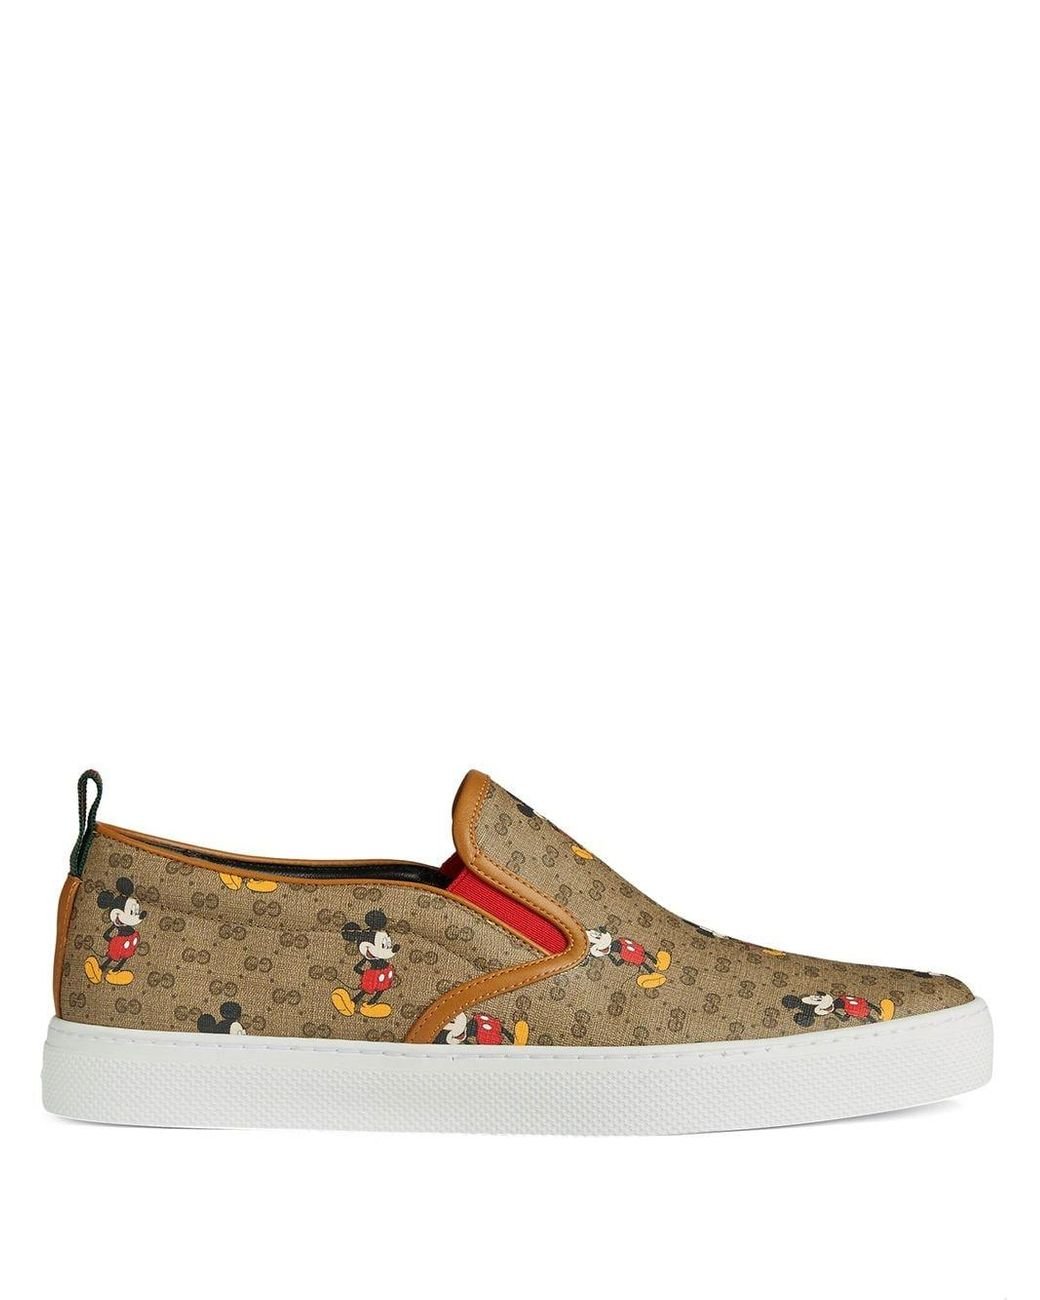 Buy Disney x Gucci Tennis 1977 'Mickey Mouse' - 606111 H0T10 8530 | GOAT